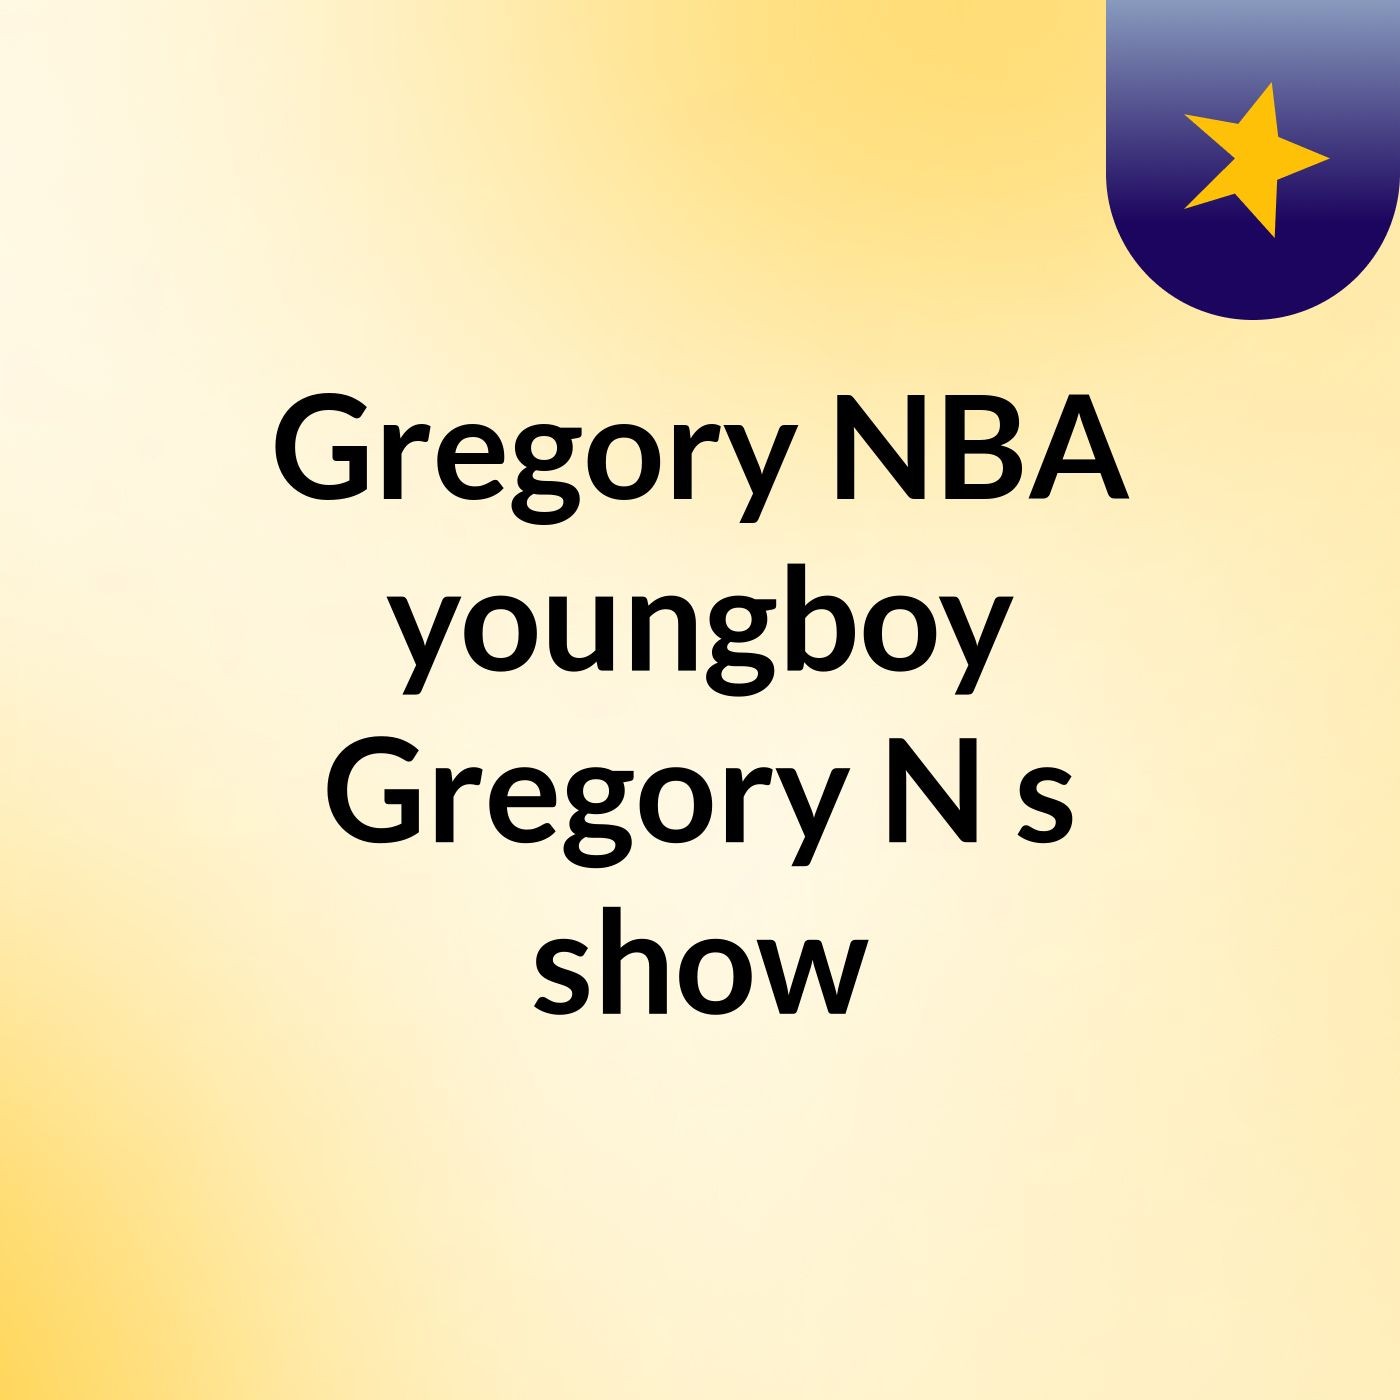 Episode 4 - Gregory NBA youngboy Gregory N's show